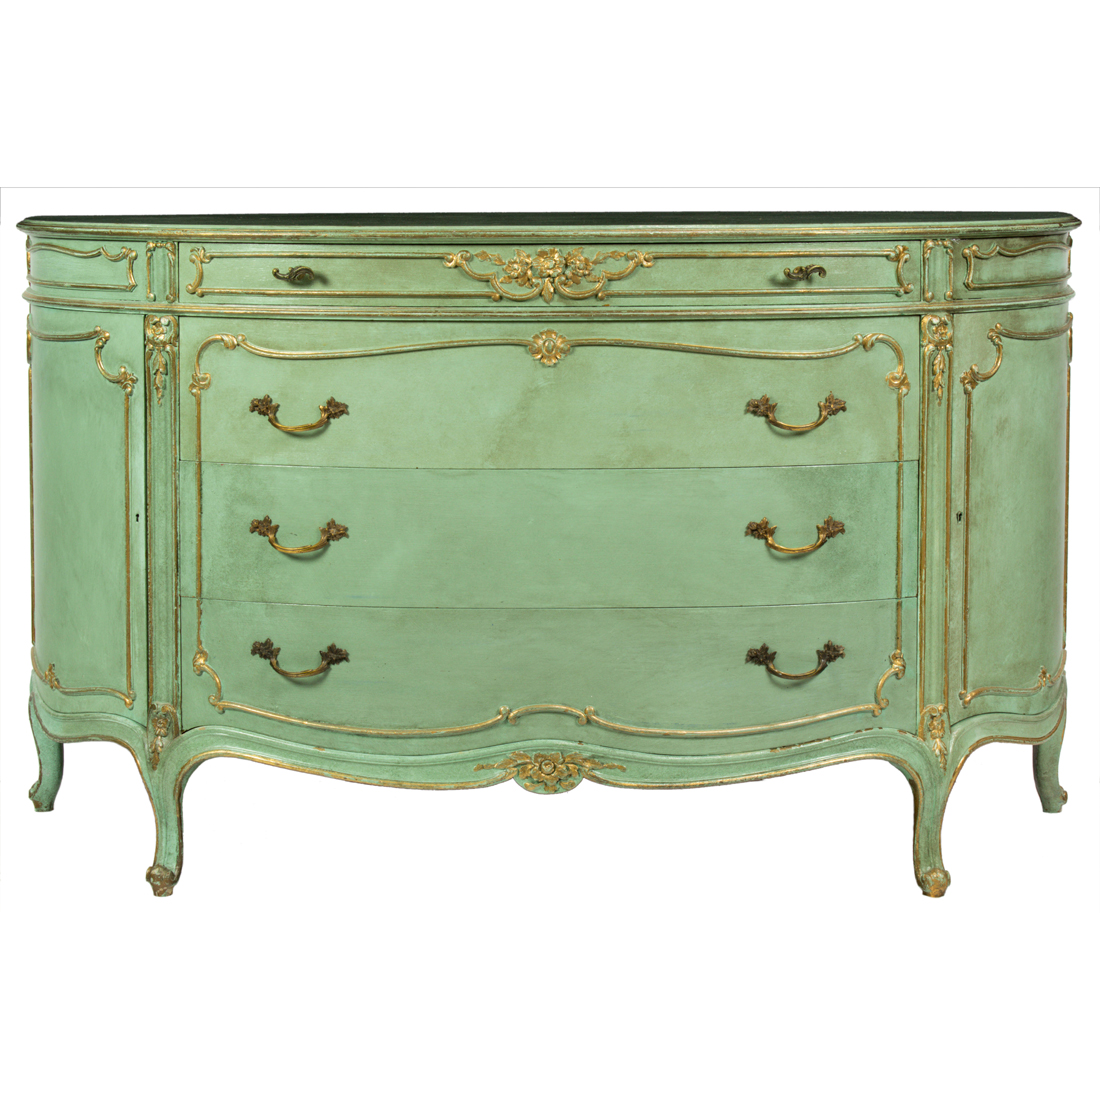 A LOUIS XVI STYLE GREEN PAINTED 2d0f62